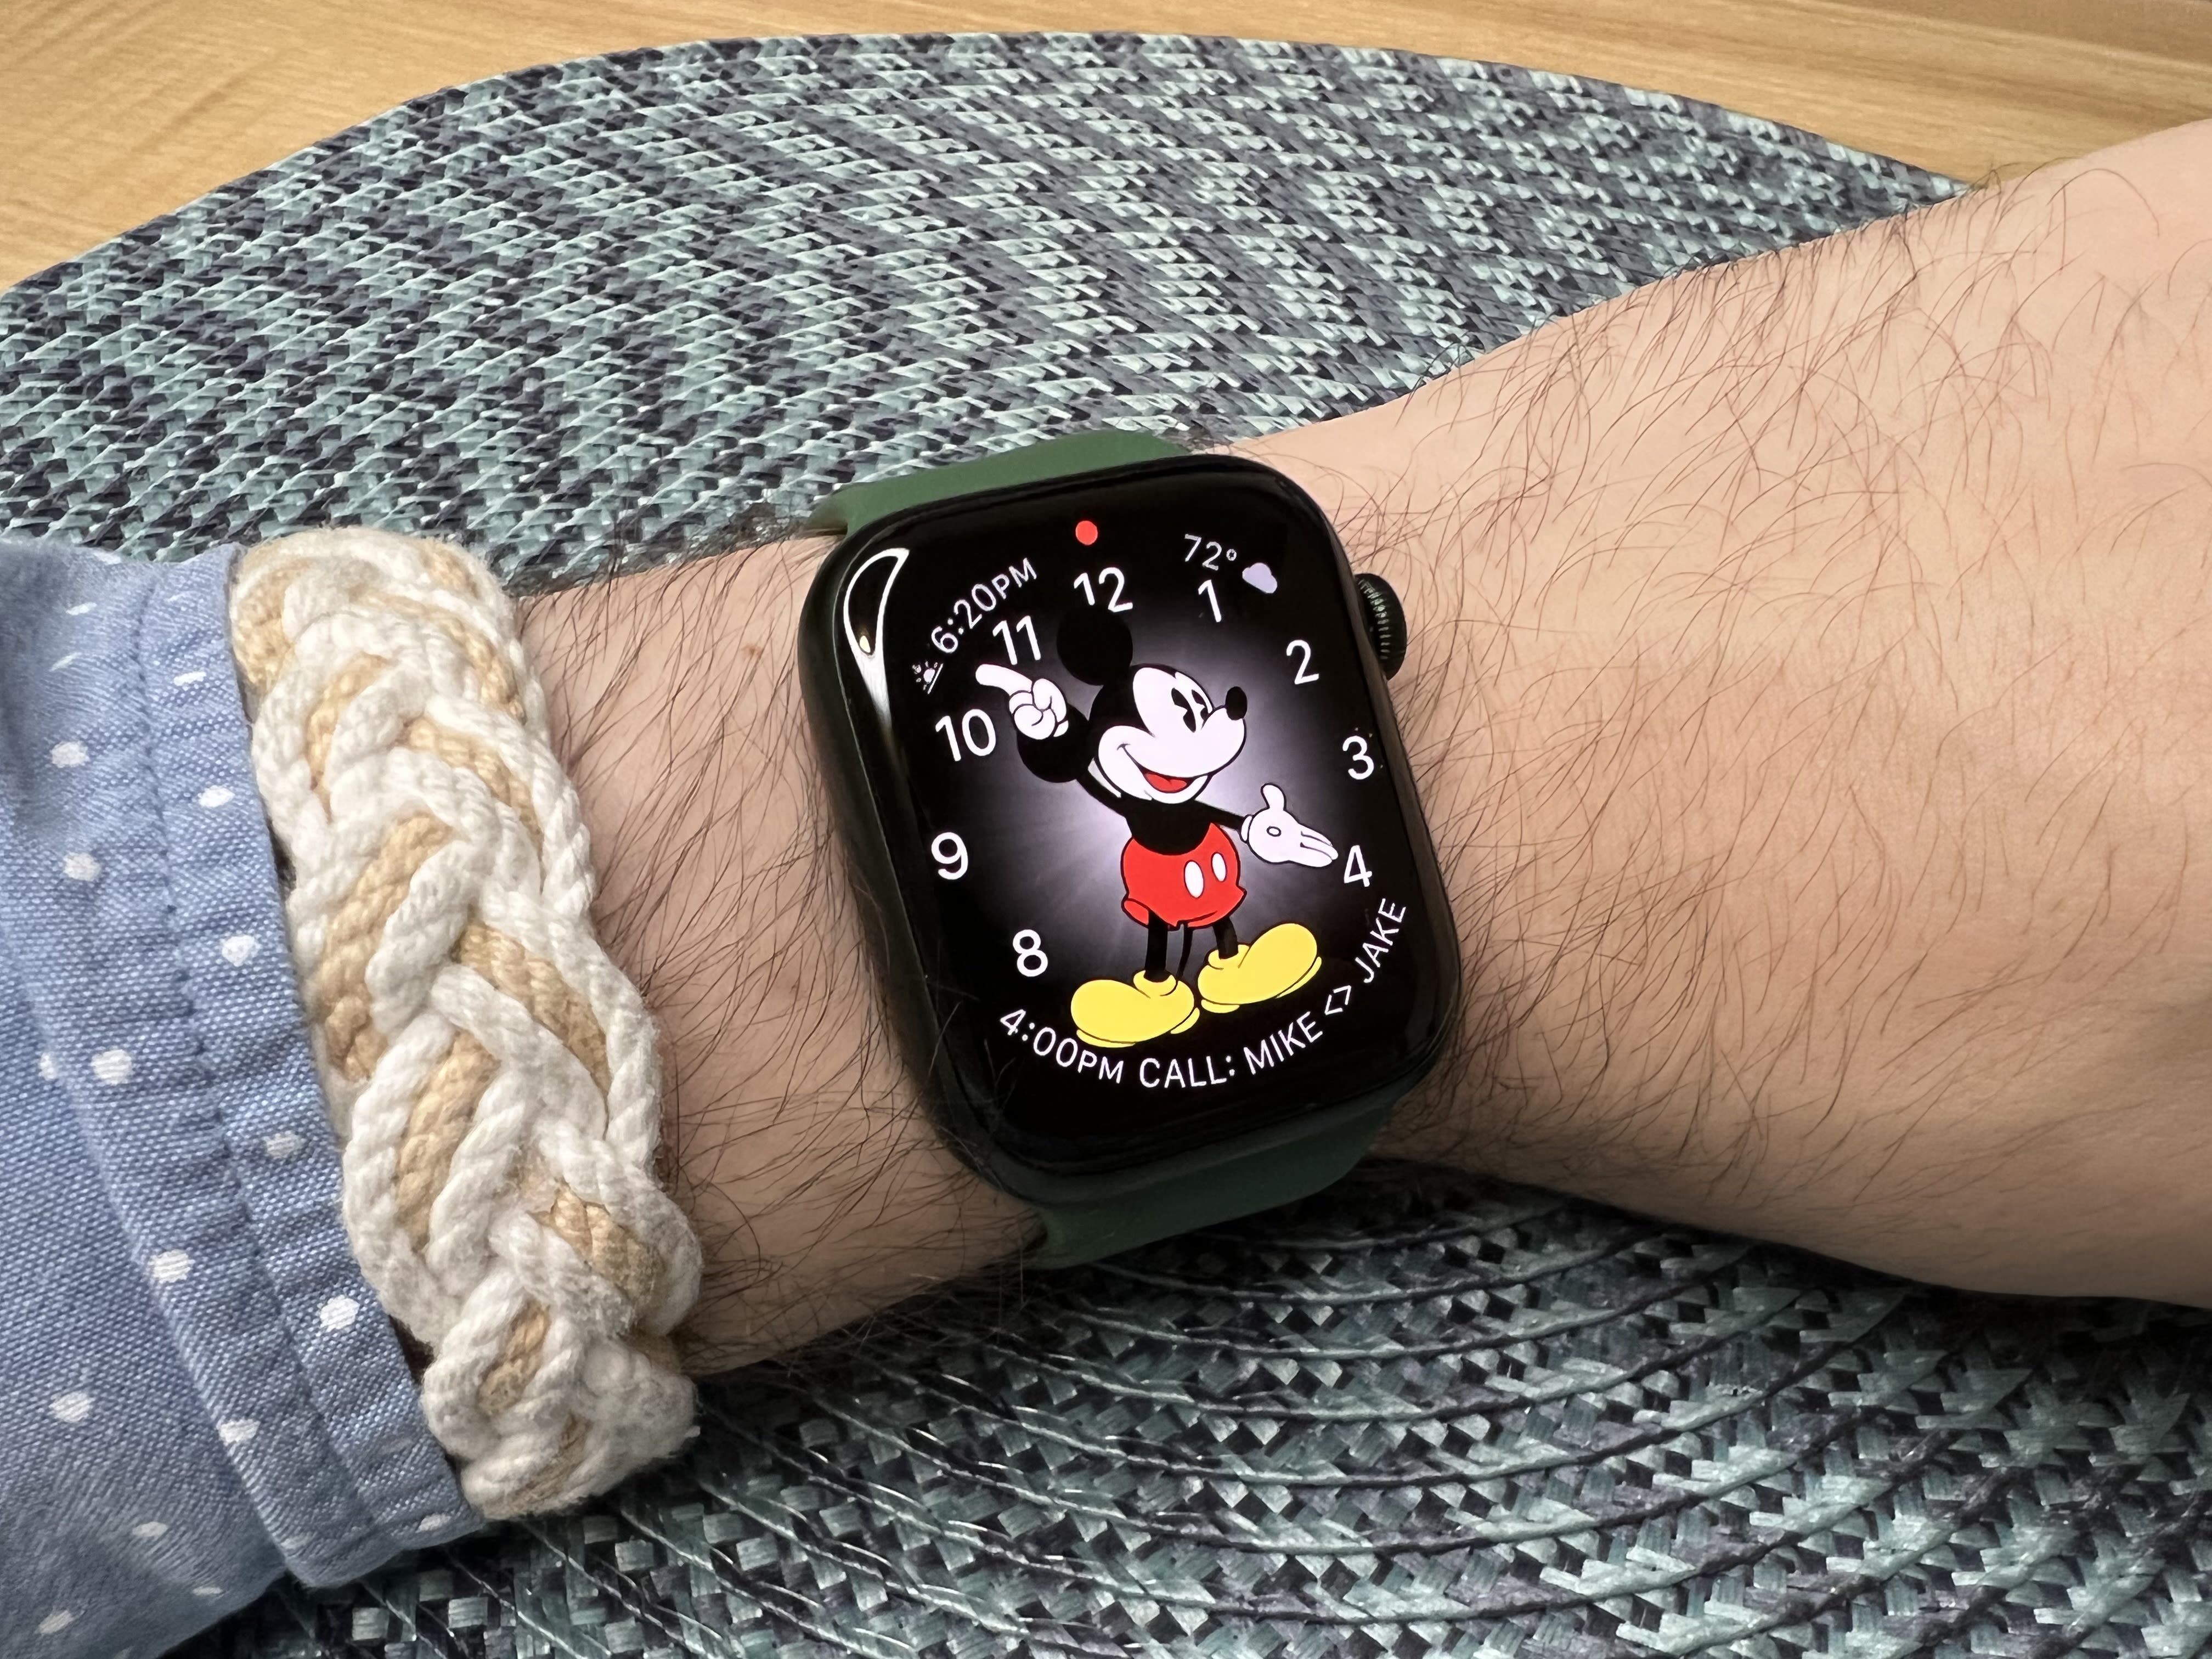 Apple Watch Series 7 review: A bigger screen and more durable design